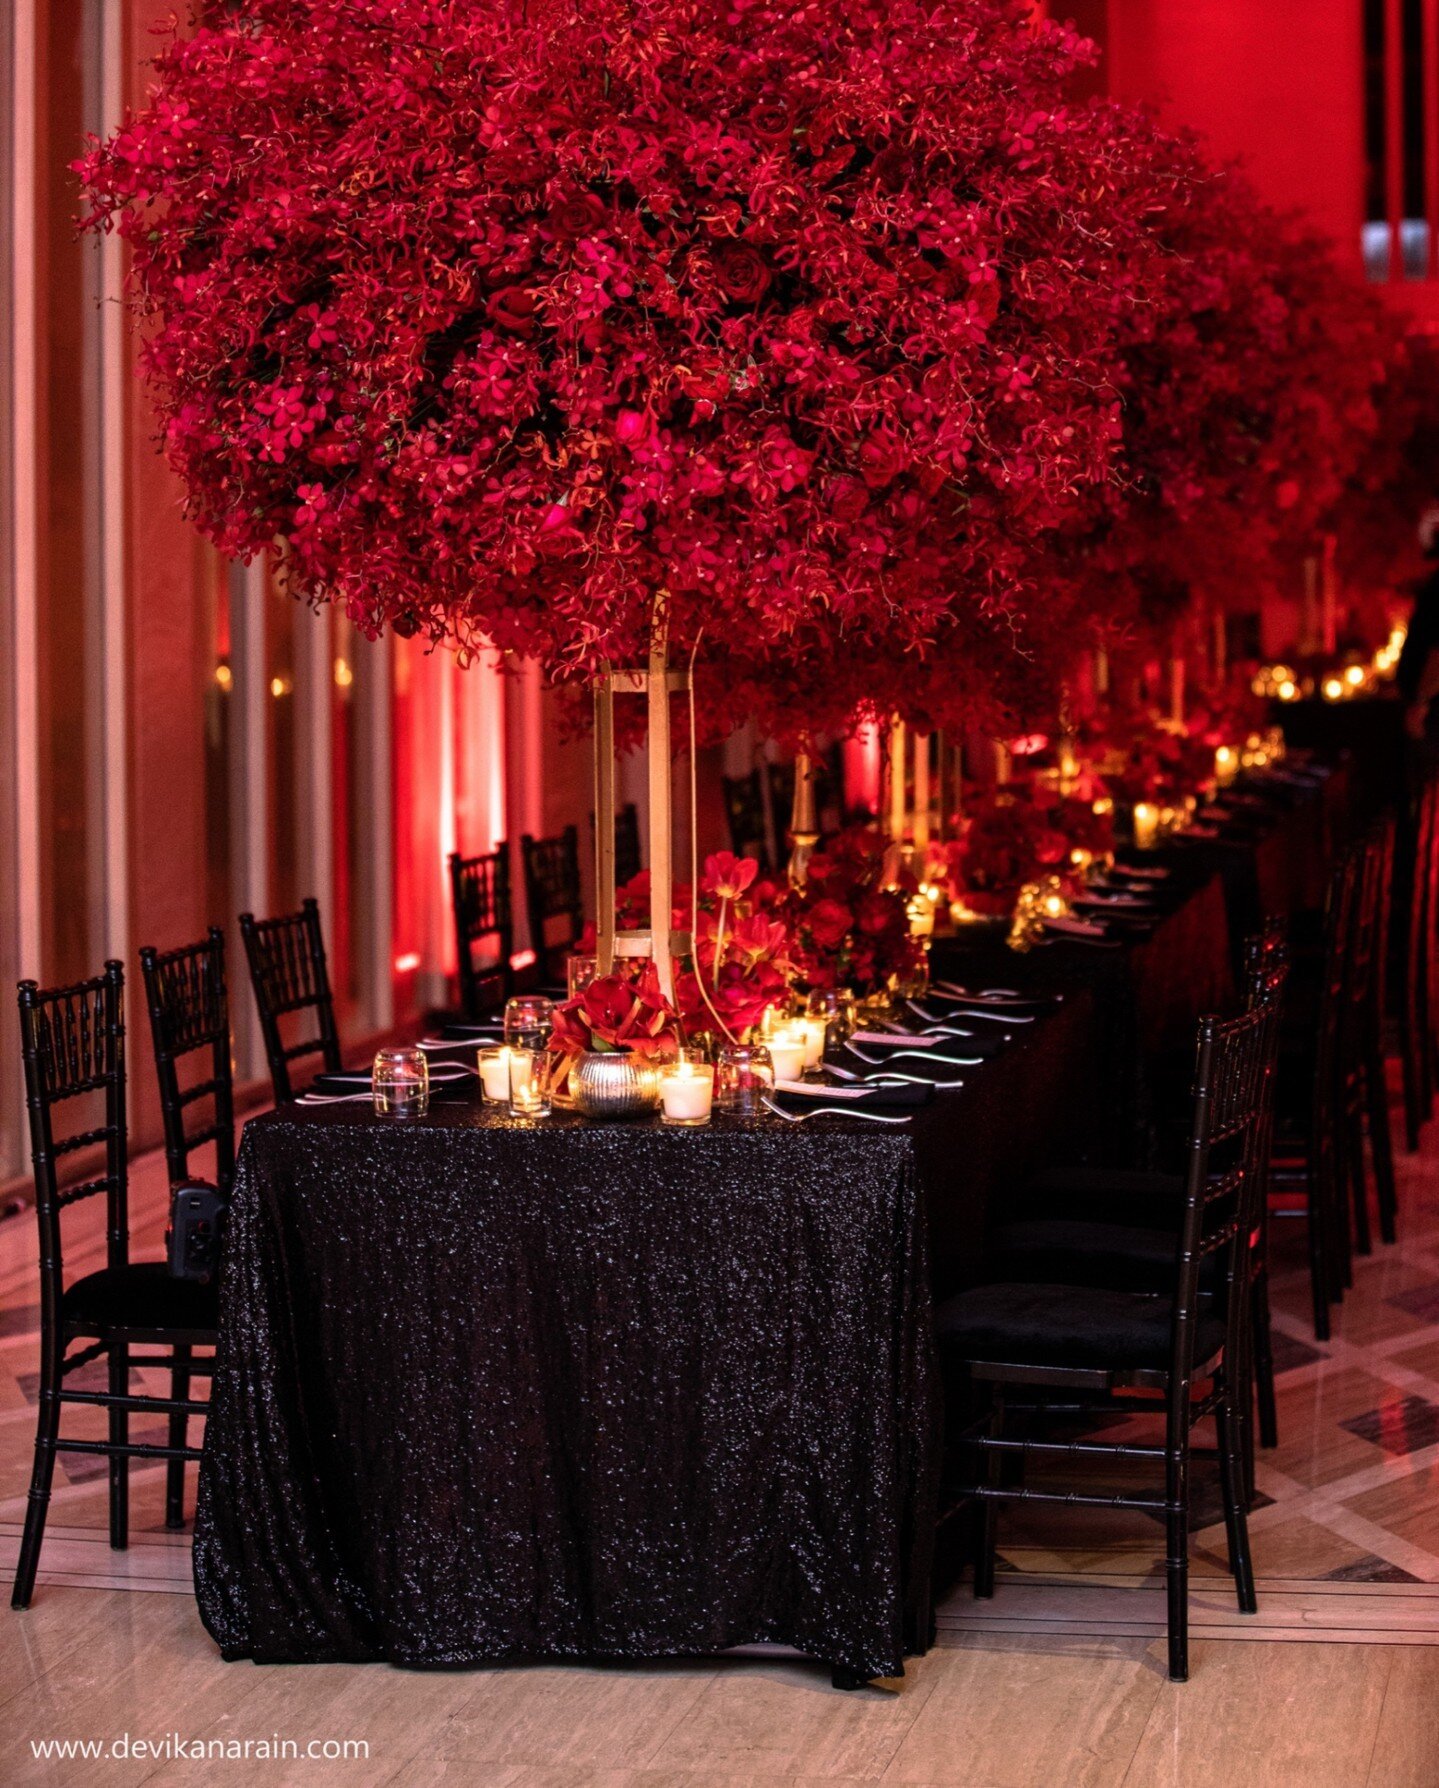 A spy's banquet.
A hundred foot long table was set along the halls clad in black sequins. Three thousand stems of red mokaras made the dramatic centerpieces that could practically kiss the ceiling.
Mithila + Karan
Phuket
March 2022 

Design and Conce